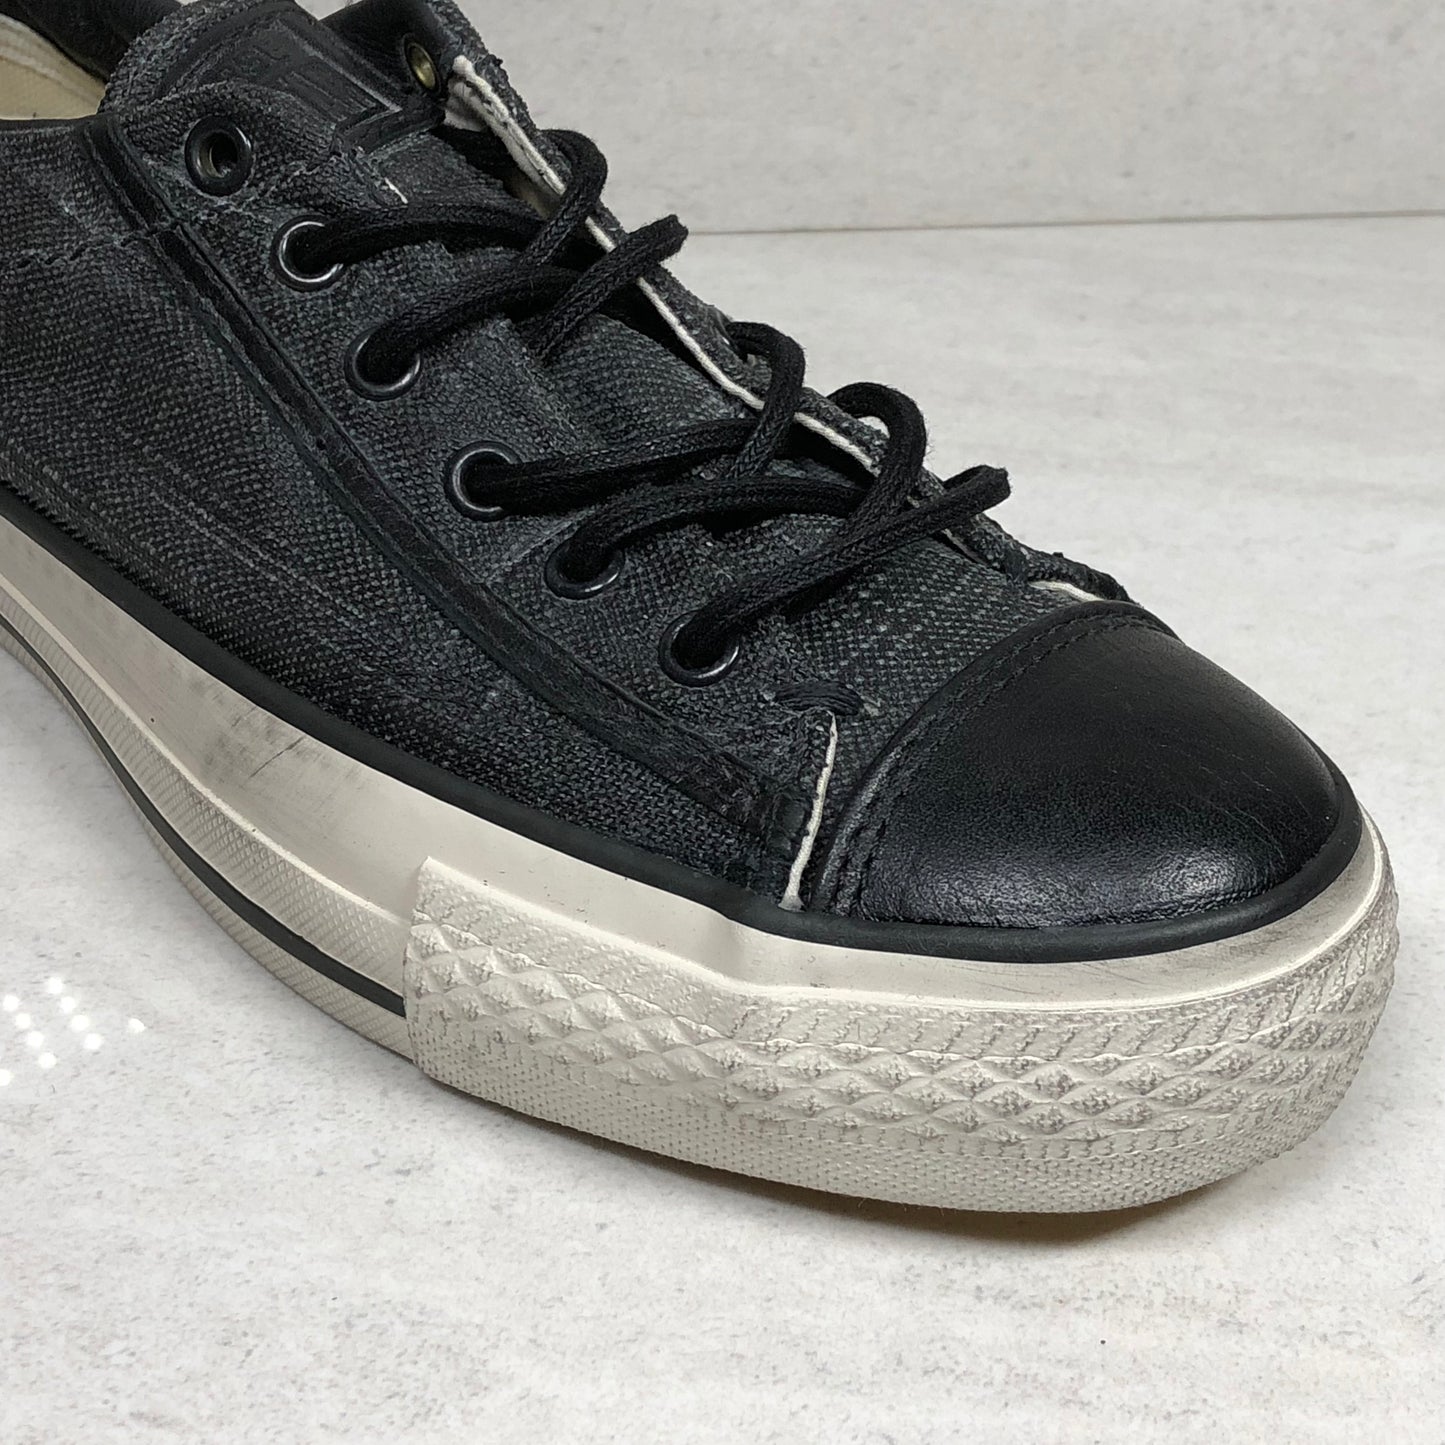 DS Converse Chuck Taylor Coated Canvas Low Top Size 3-6.5M/5-8.5W Black 150179C